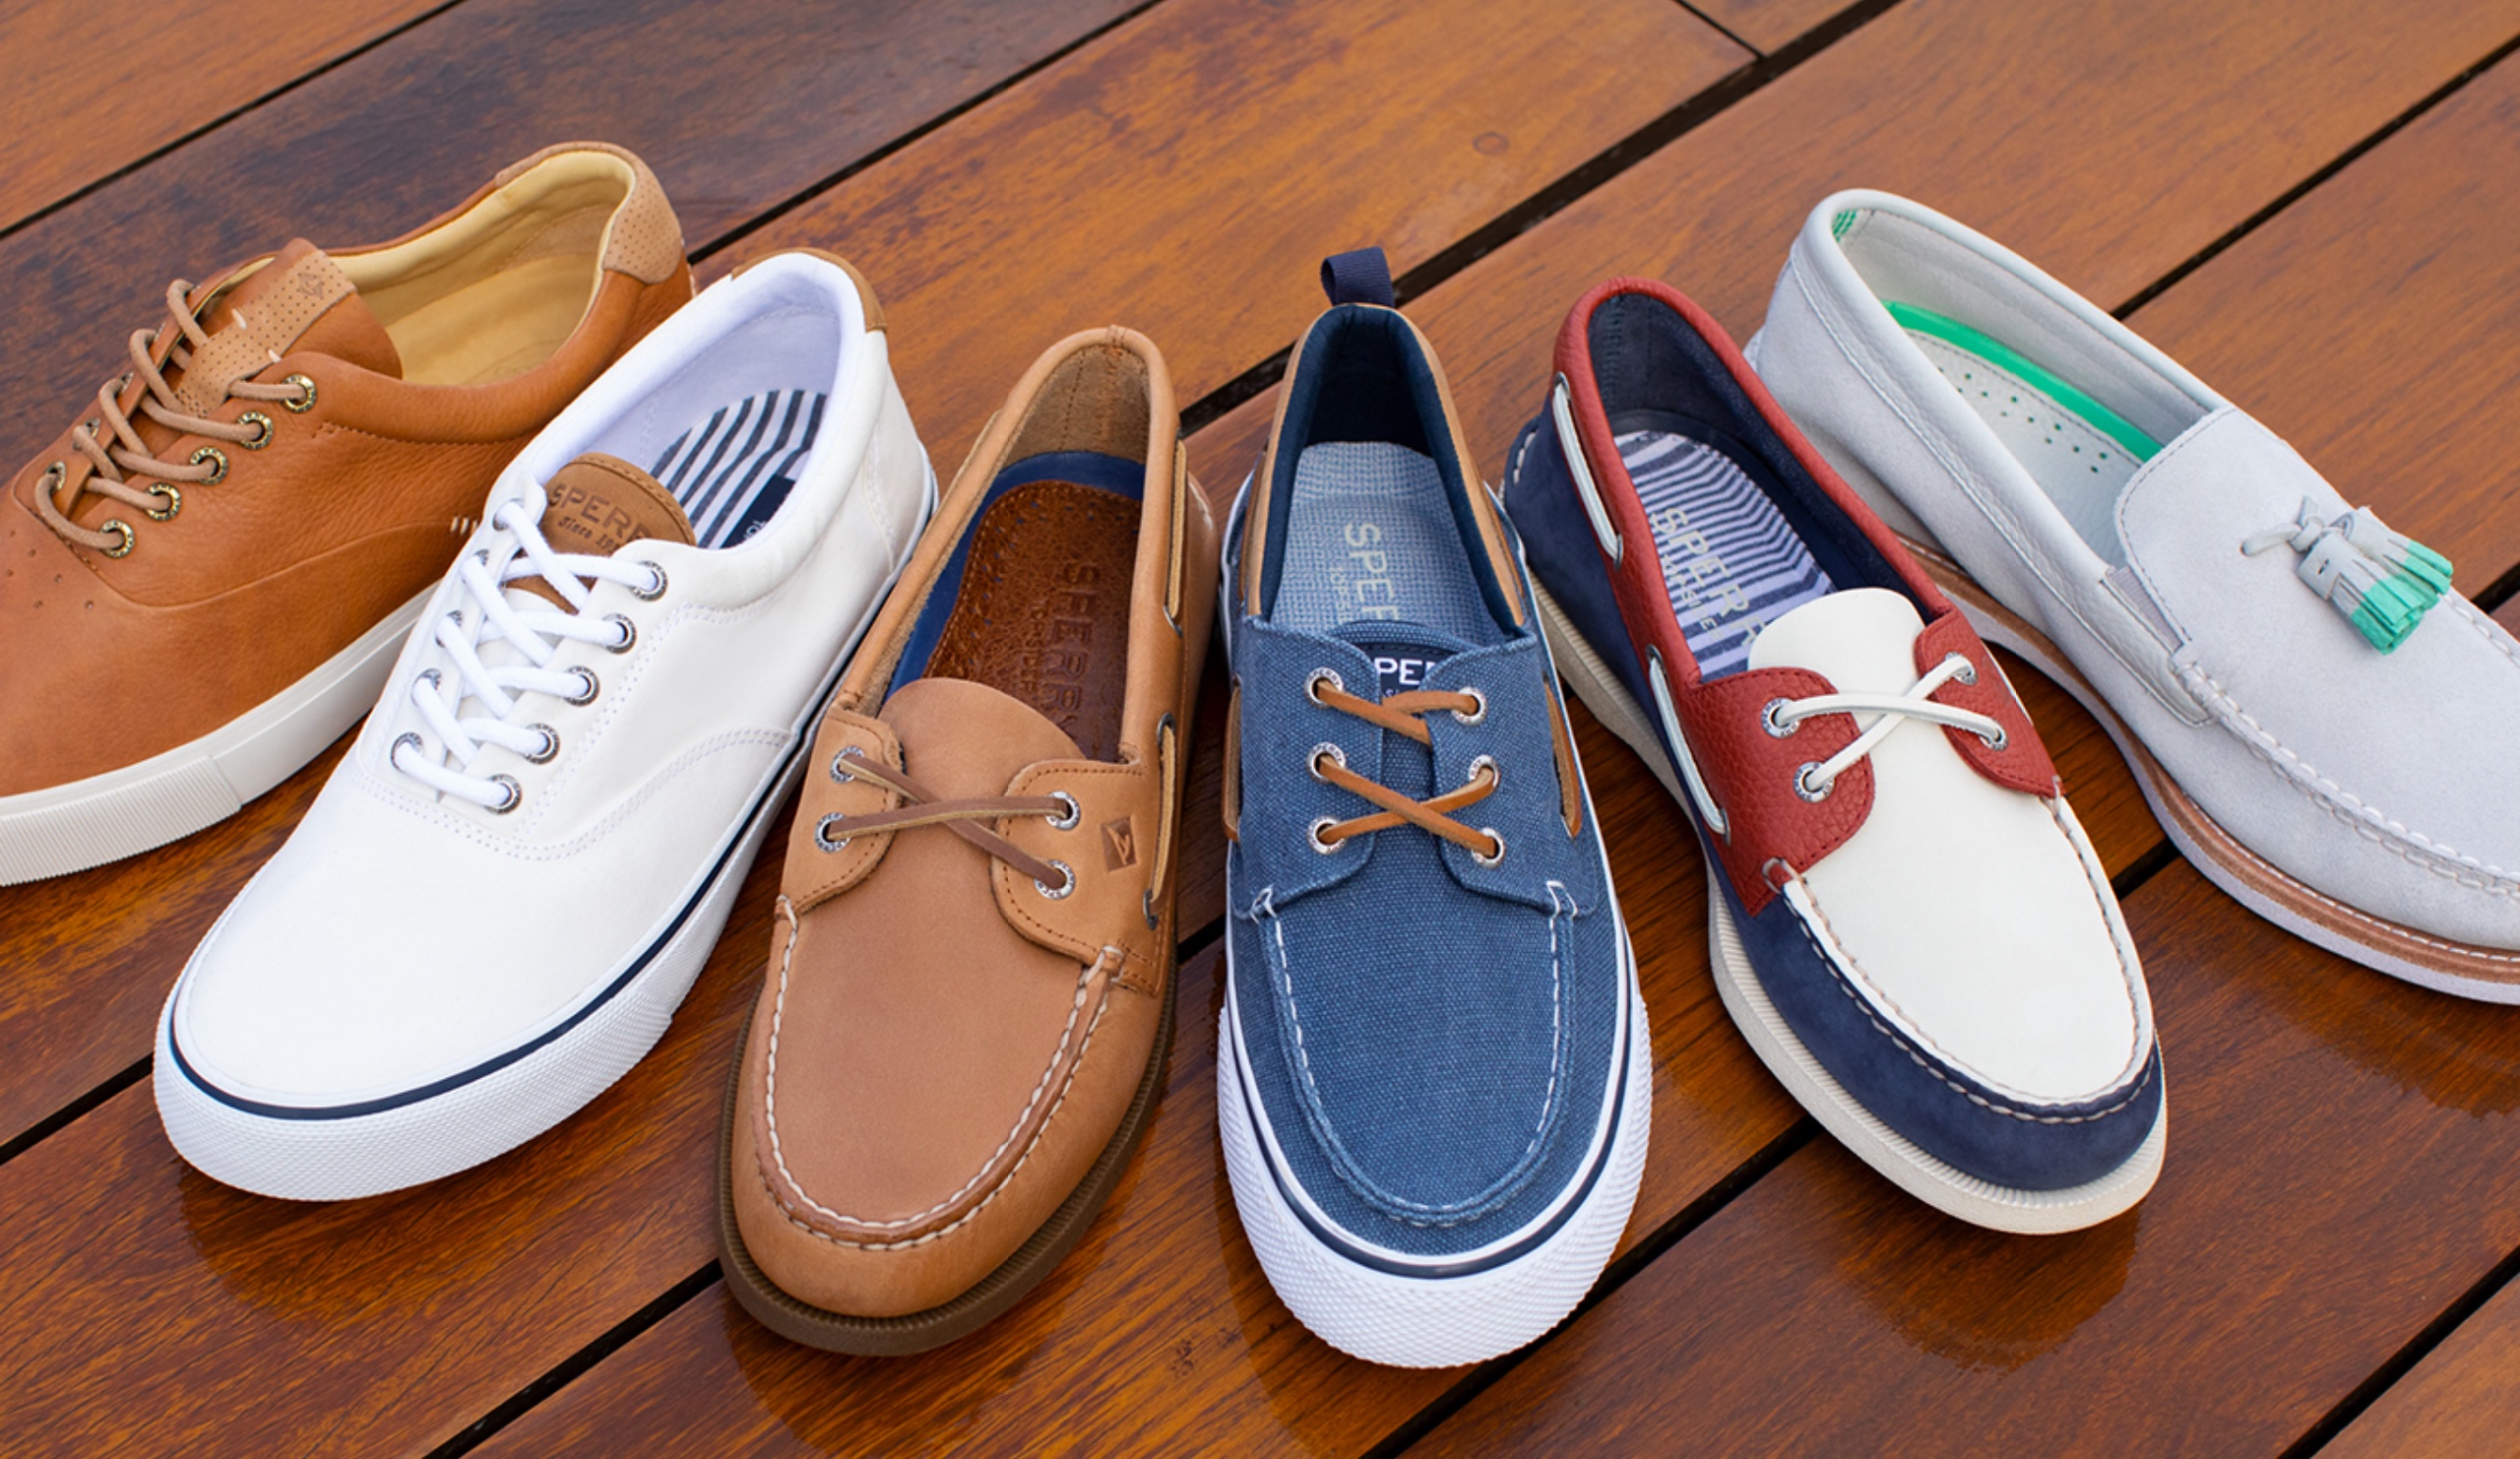 Sperry x John Legend Father's Day Gift Guide: Boat shoes, mor - 9to5Toys